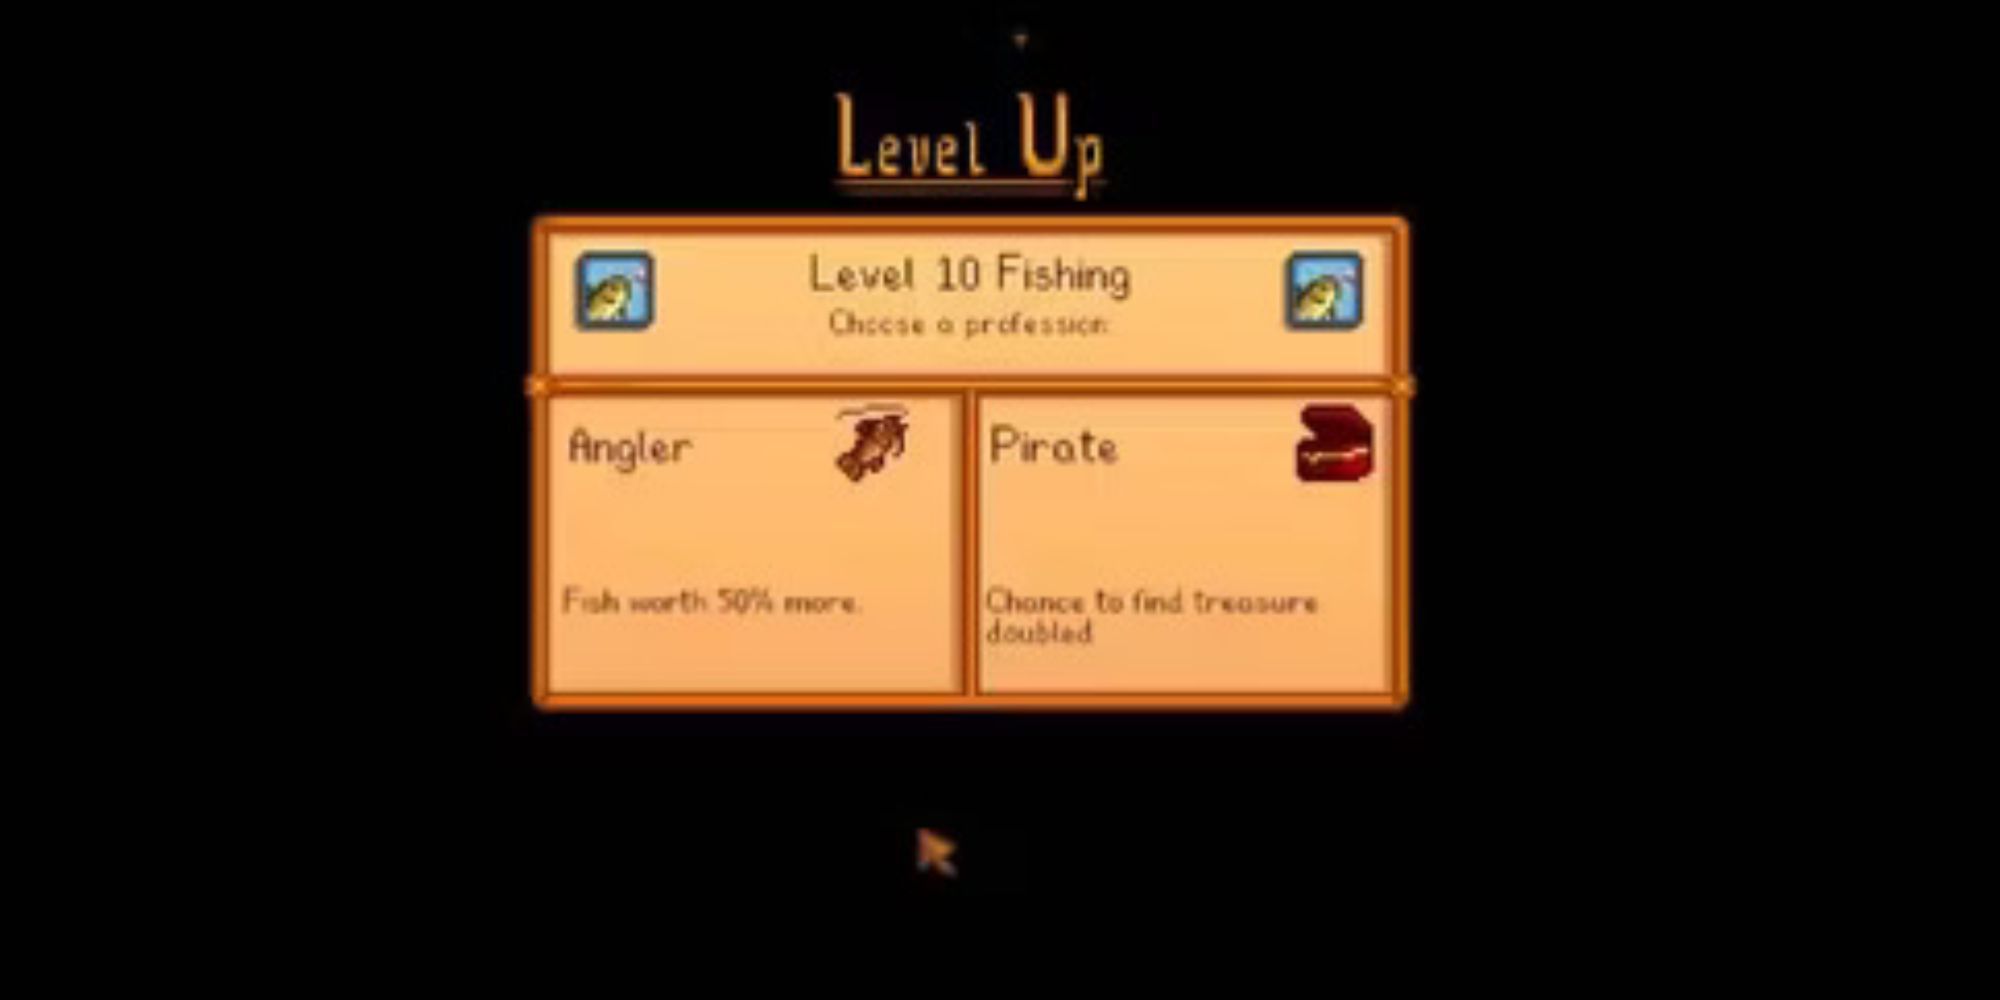 Choosing the Pirate profession in Stardew Valley